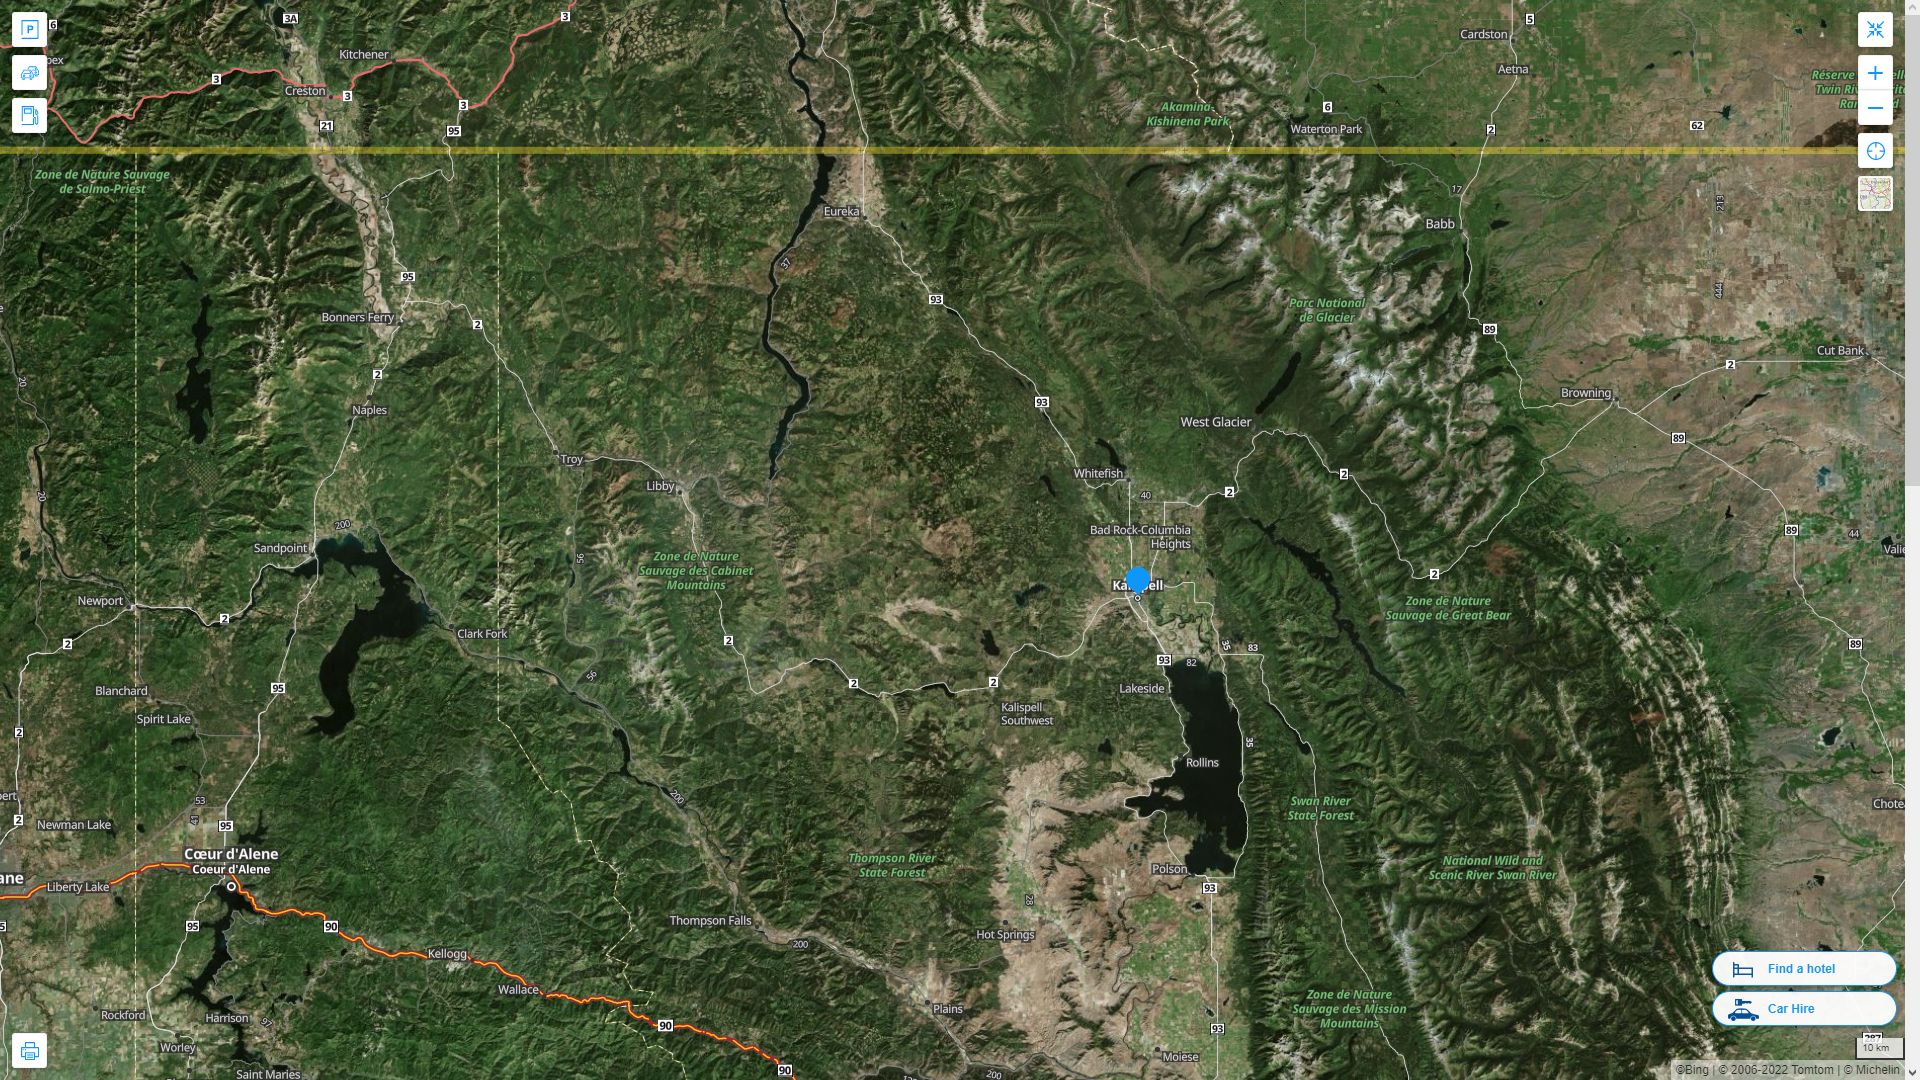 Kalispell Montana Highway and Road Map with Satellite View